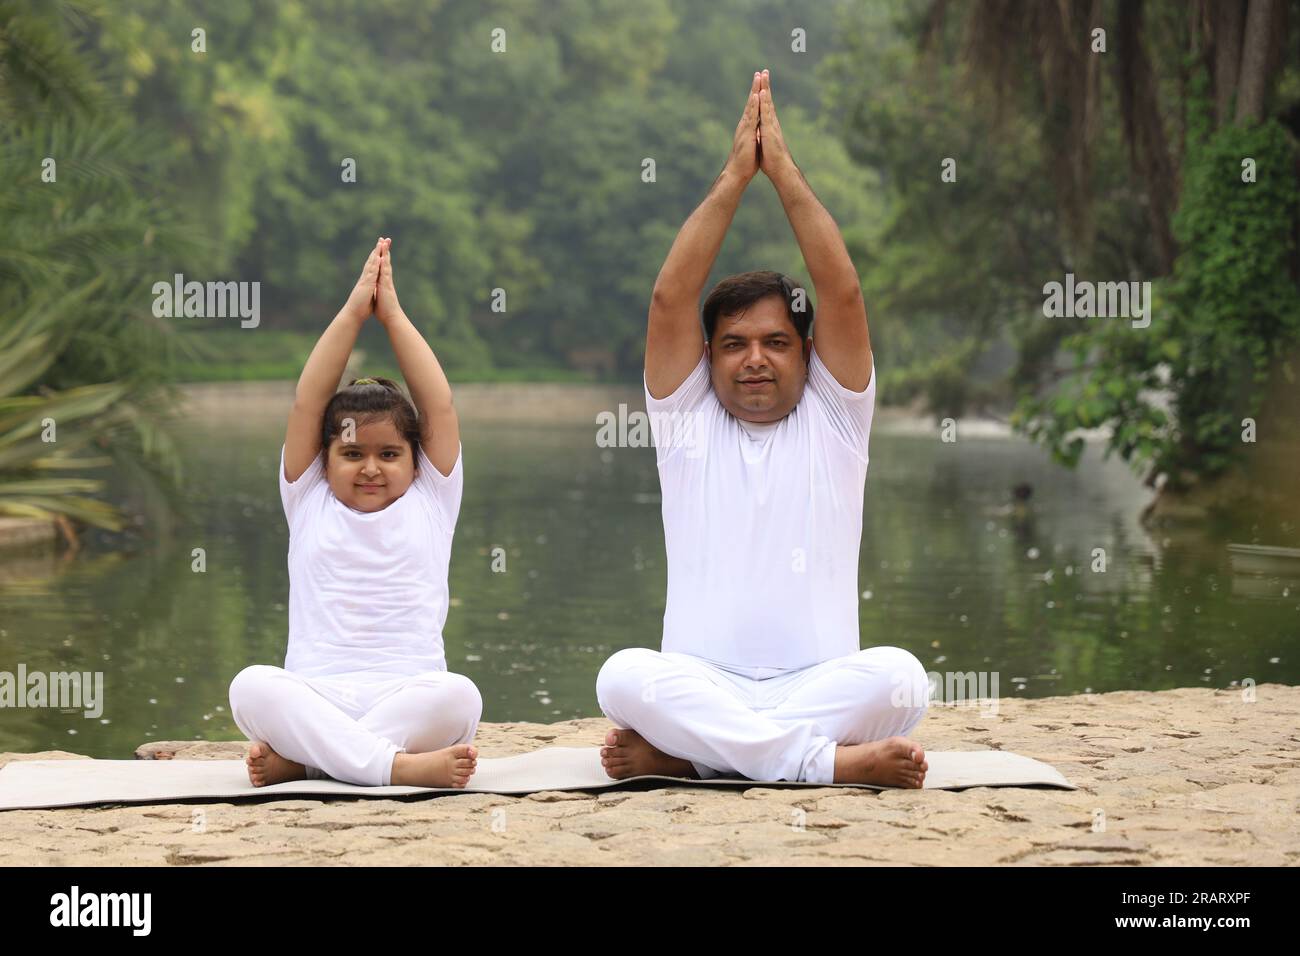 Obese family exercising and doing Yoga poses in green serene environment early morning in park to maintain healthy lifestyle. International yoga day. Stock Photo